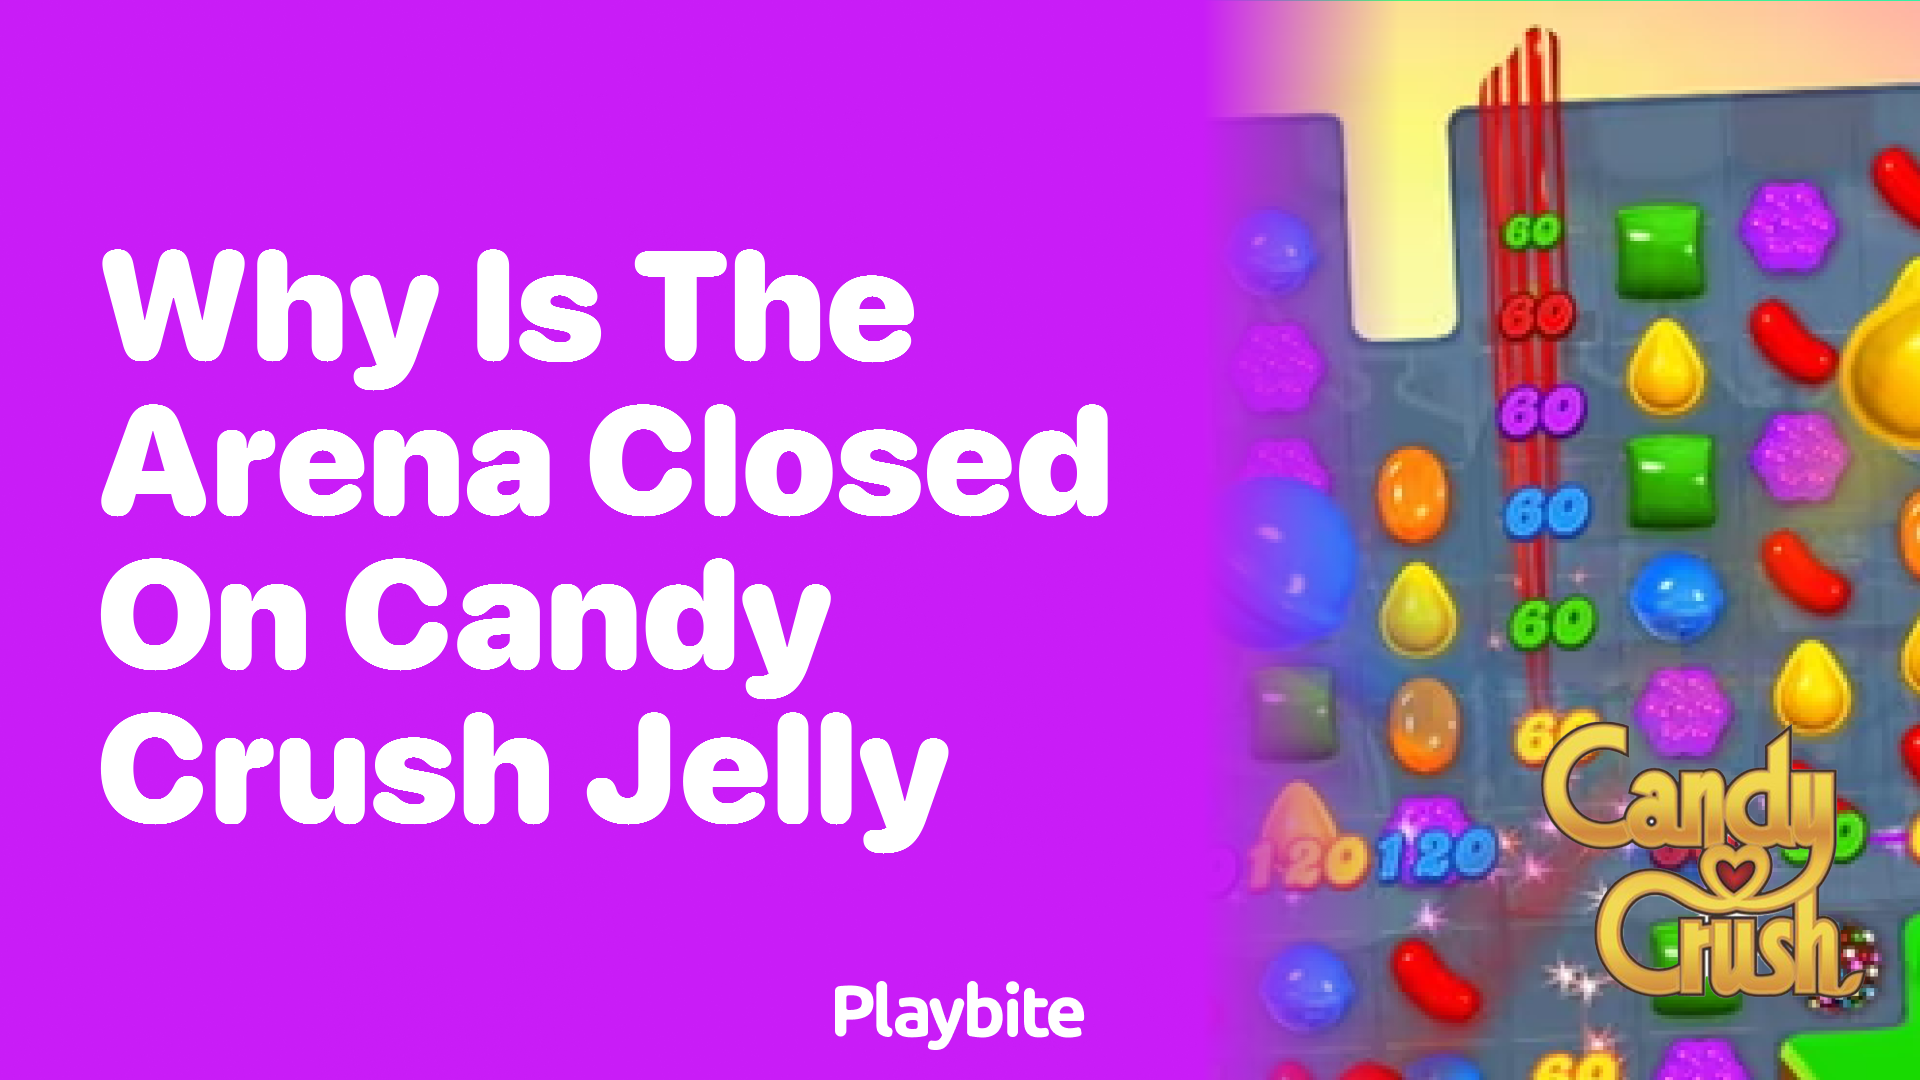 Why is the Arena Closed in Candy Crush Jelly?